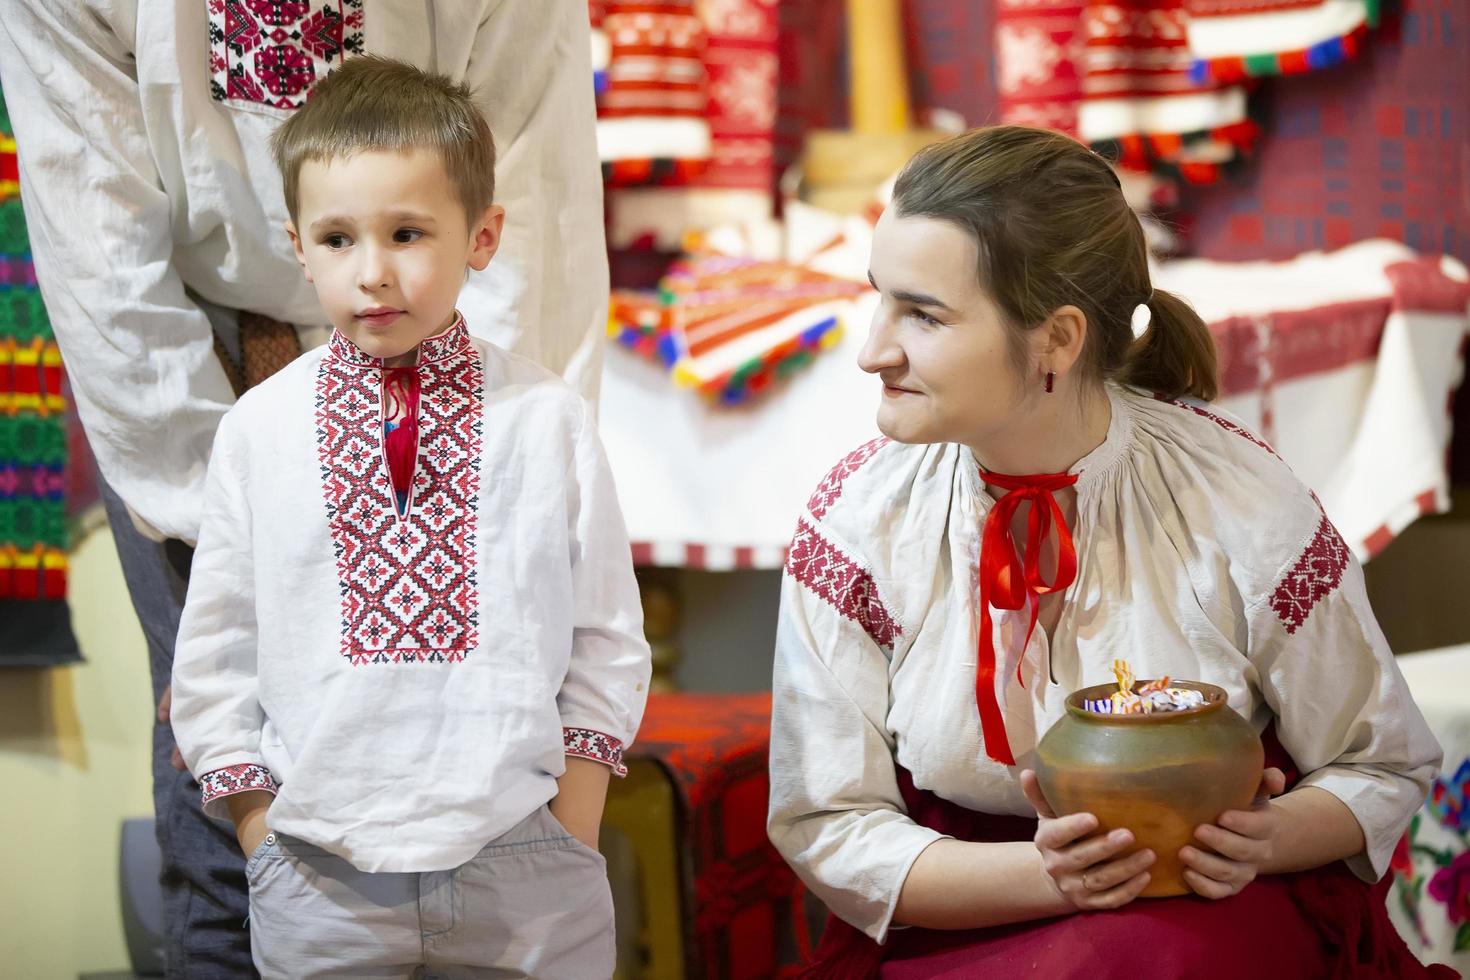 Belarus, the city of Gomil, December 24, 2016. Christmas time. Slavic people. Child and woman in Belarusian national clothes. photo